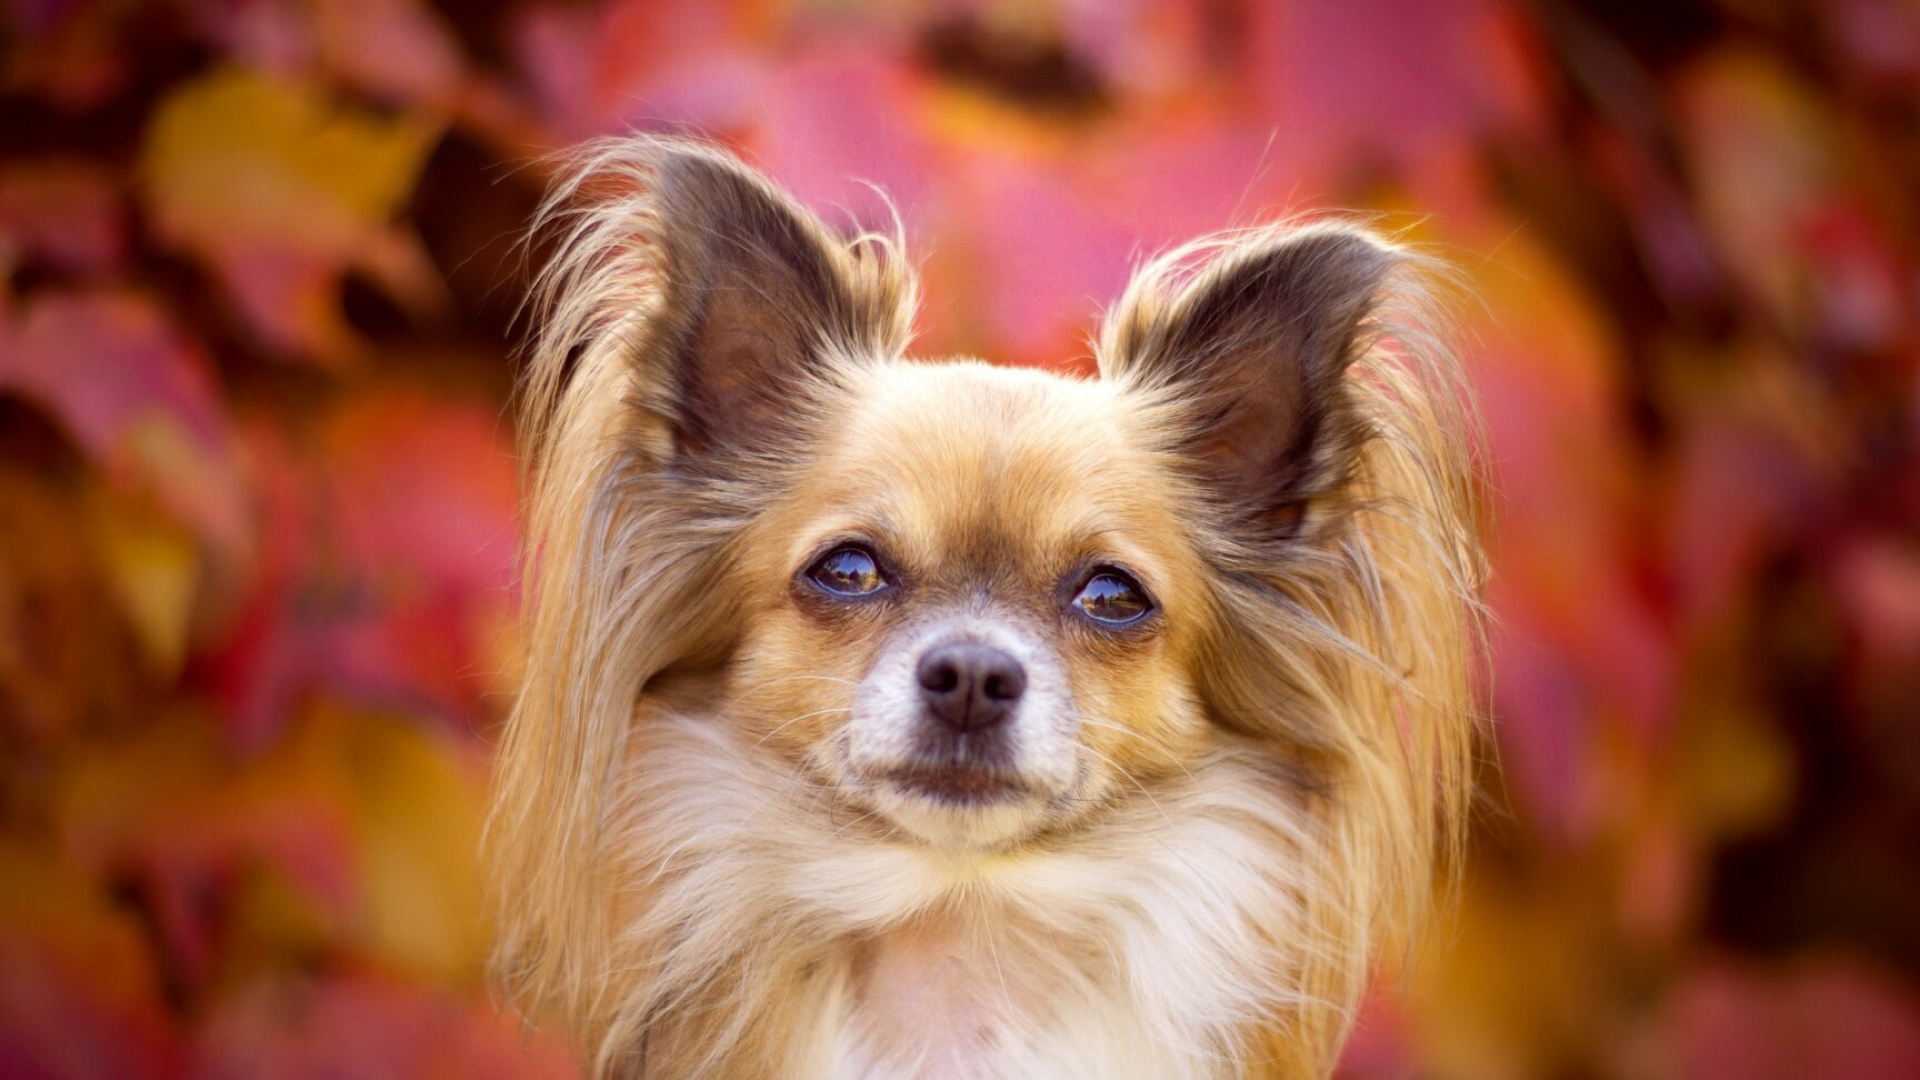 Papillon Dog: The coat is soft, full and usually white with patches of black or of pale tan to dark reddish brown. 1920x1080 Full HD Wallpaper.